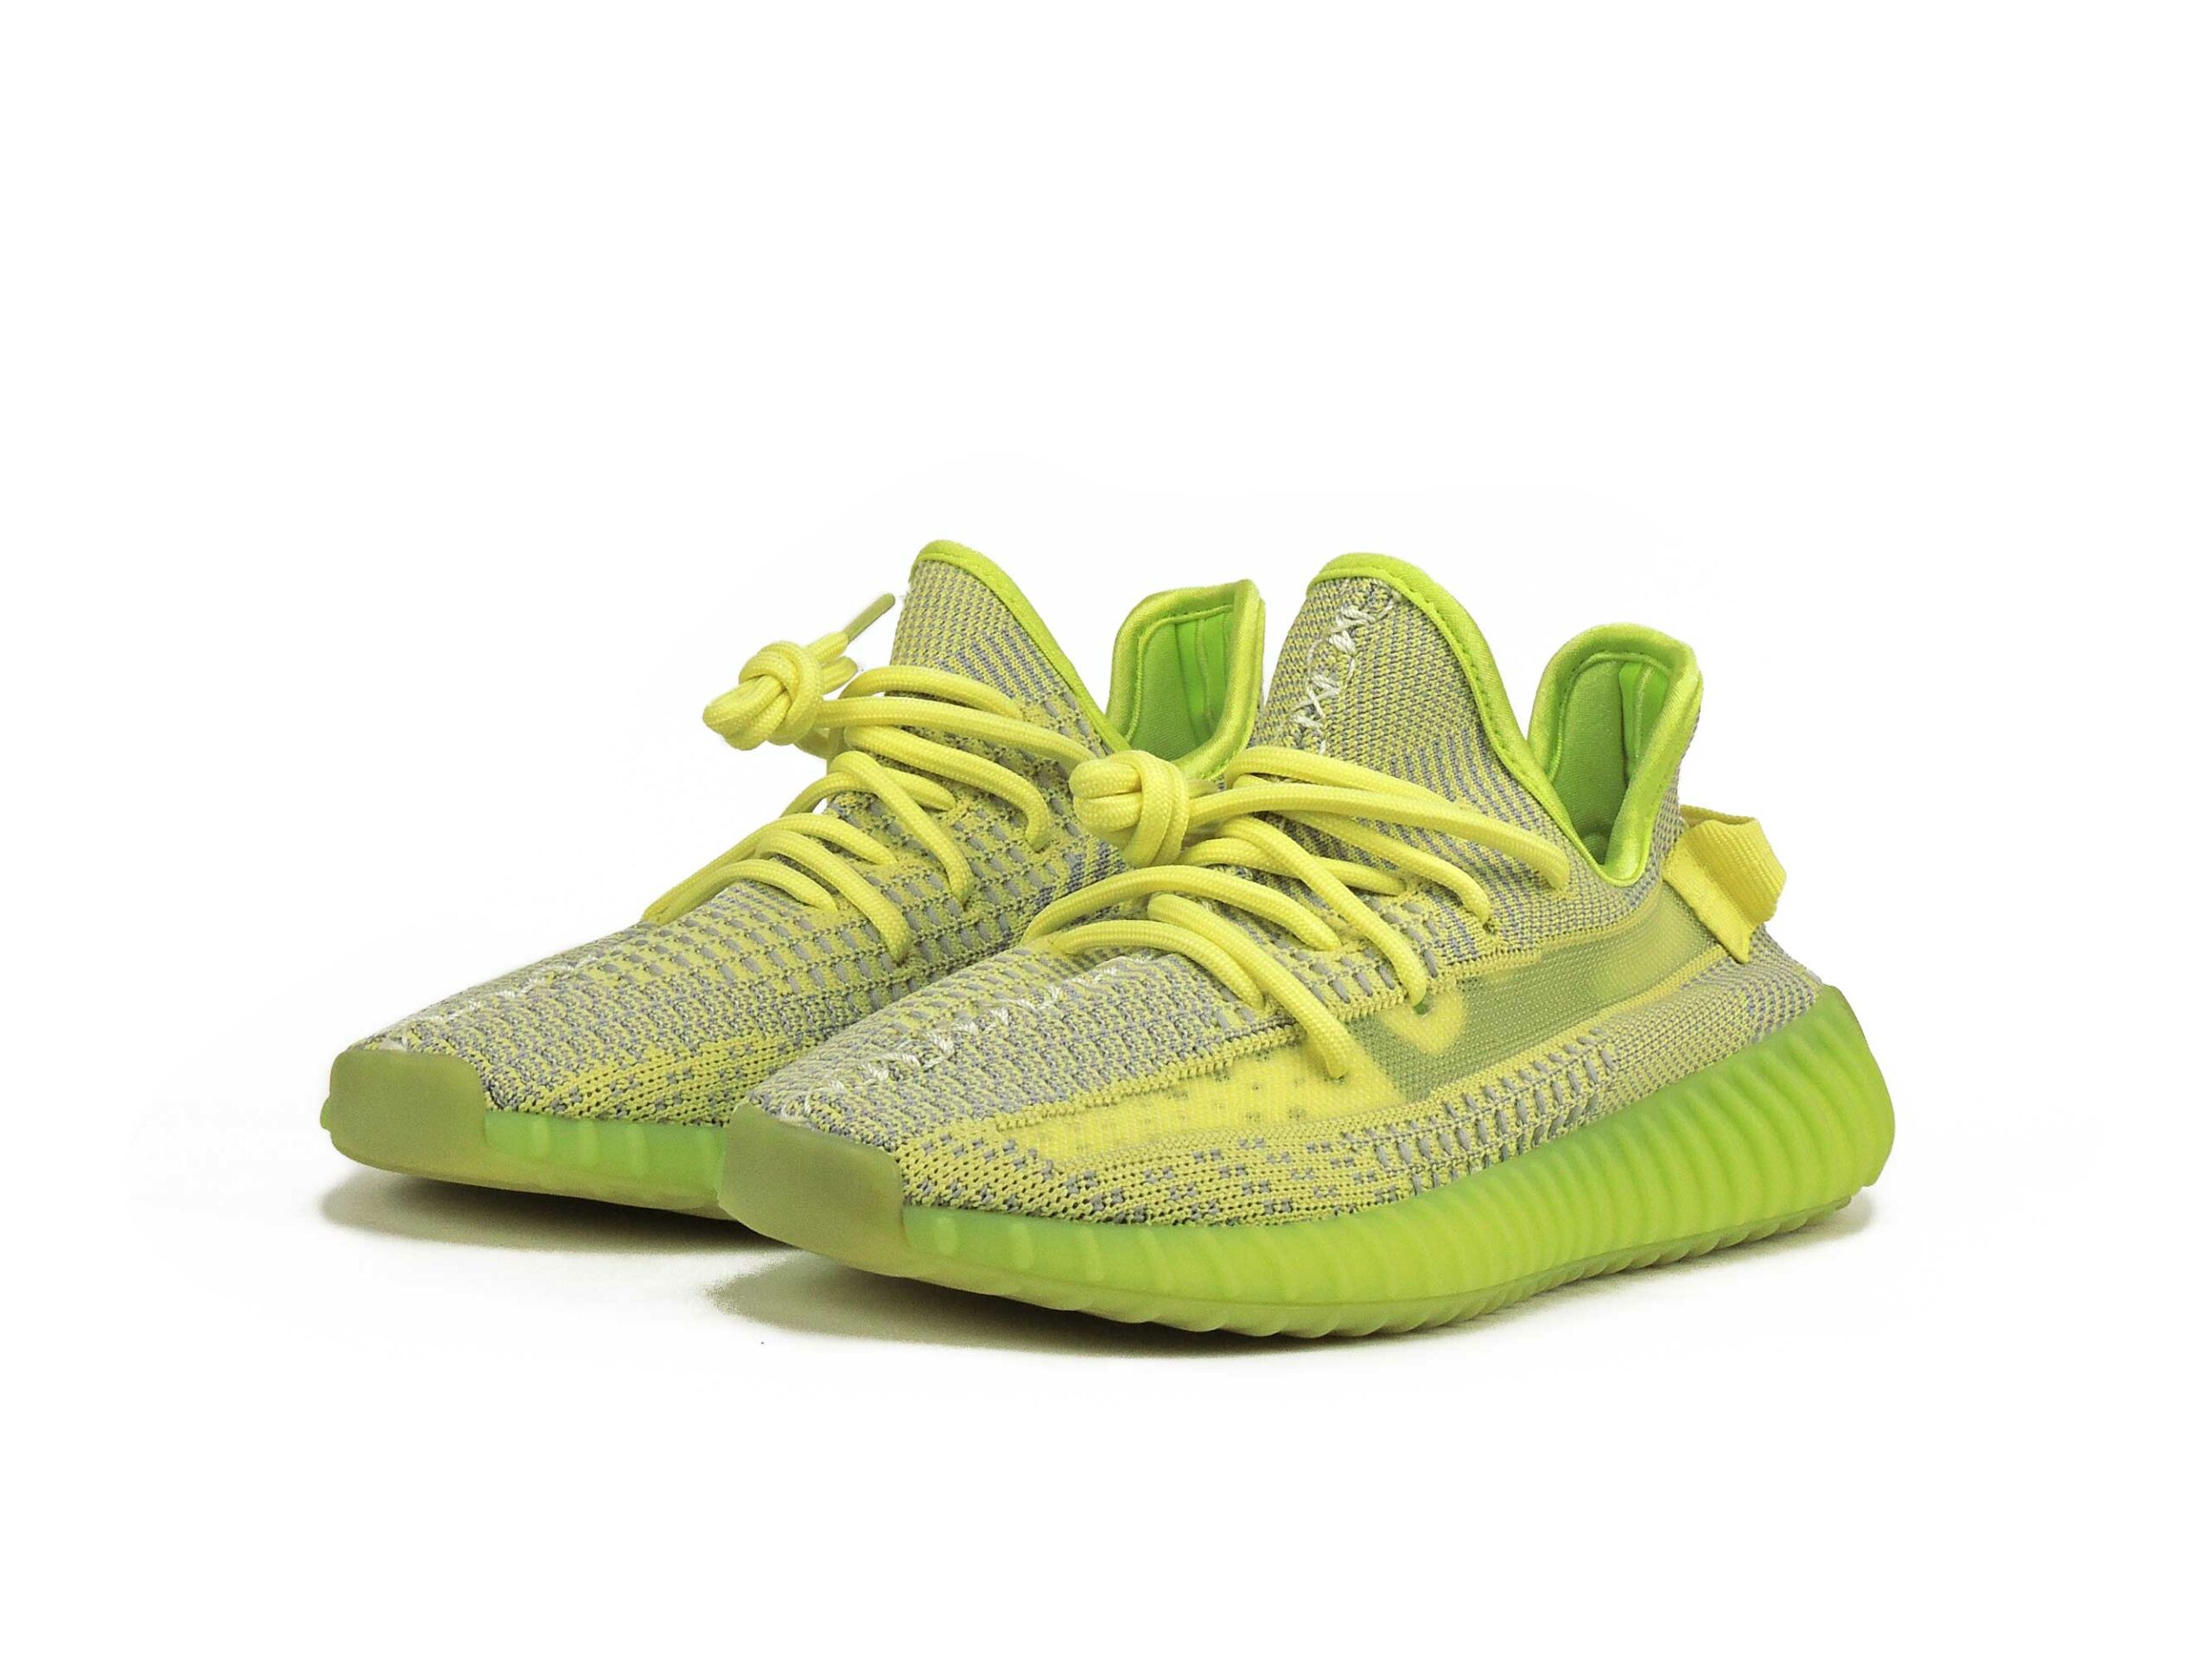 adidas yeezy boost 350 V2 yellow lime 